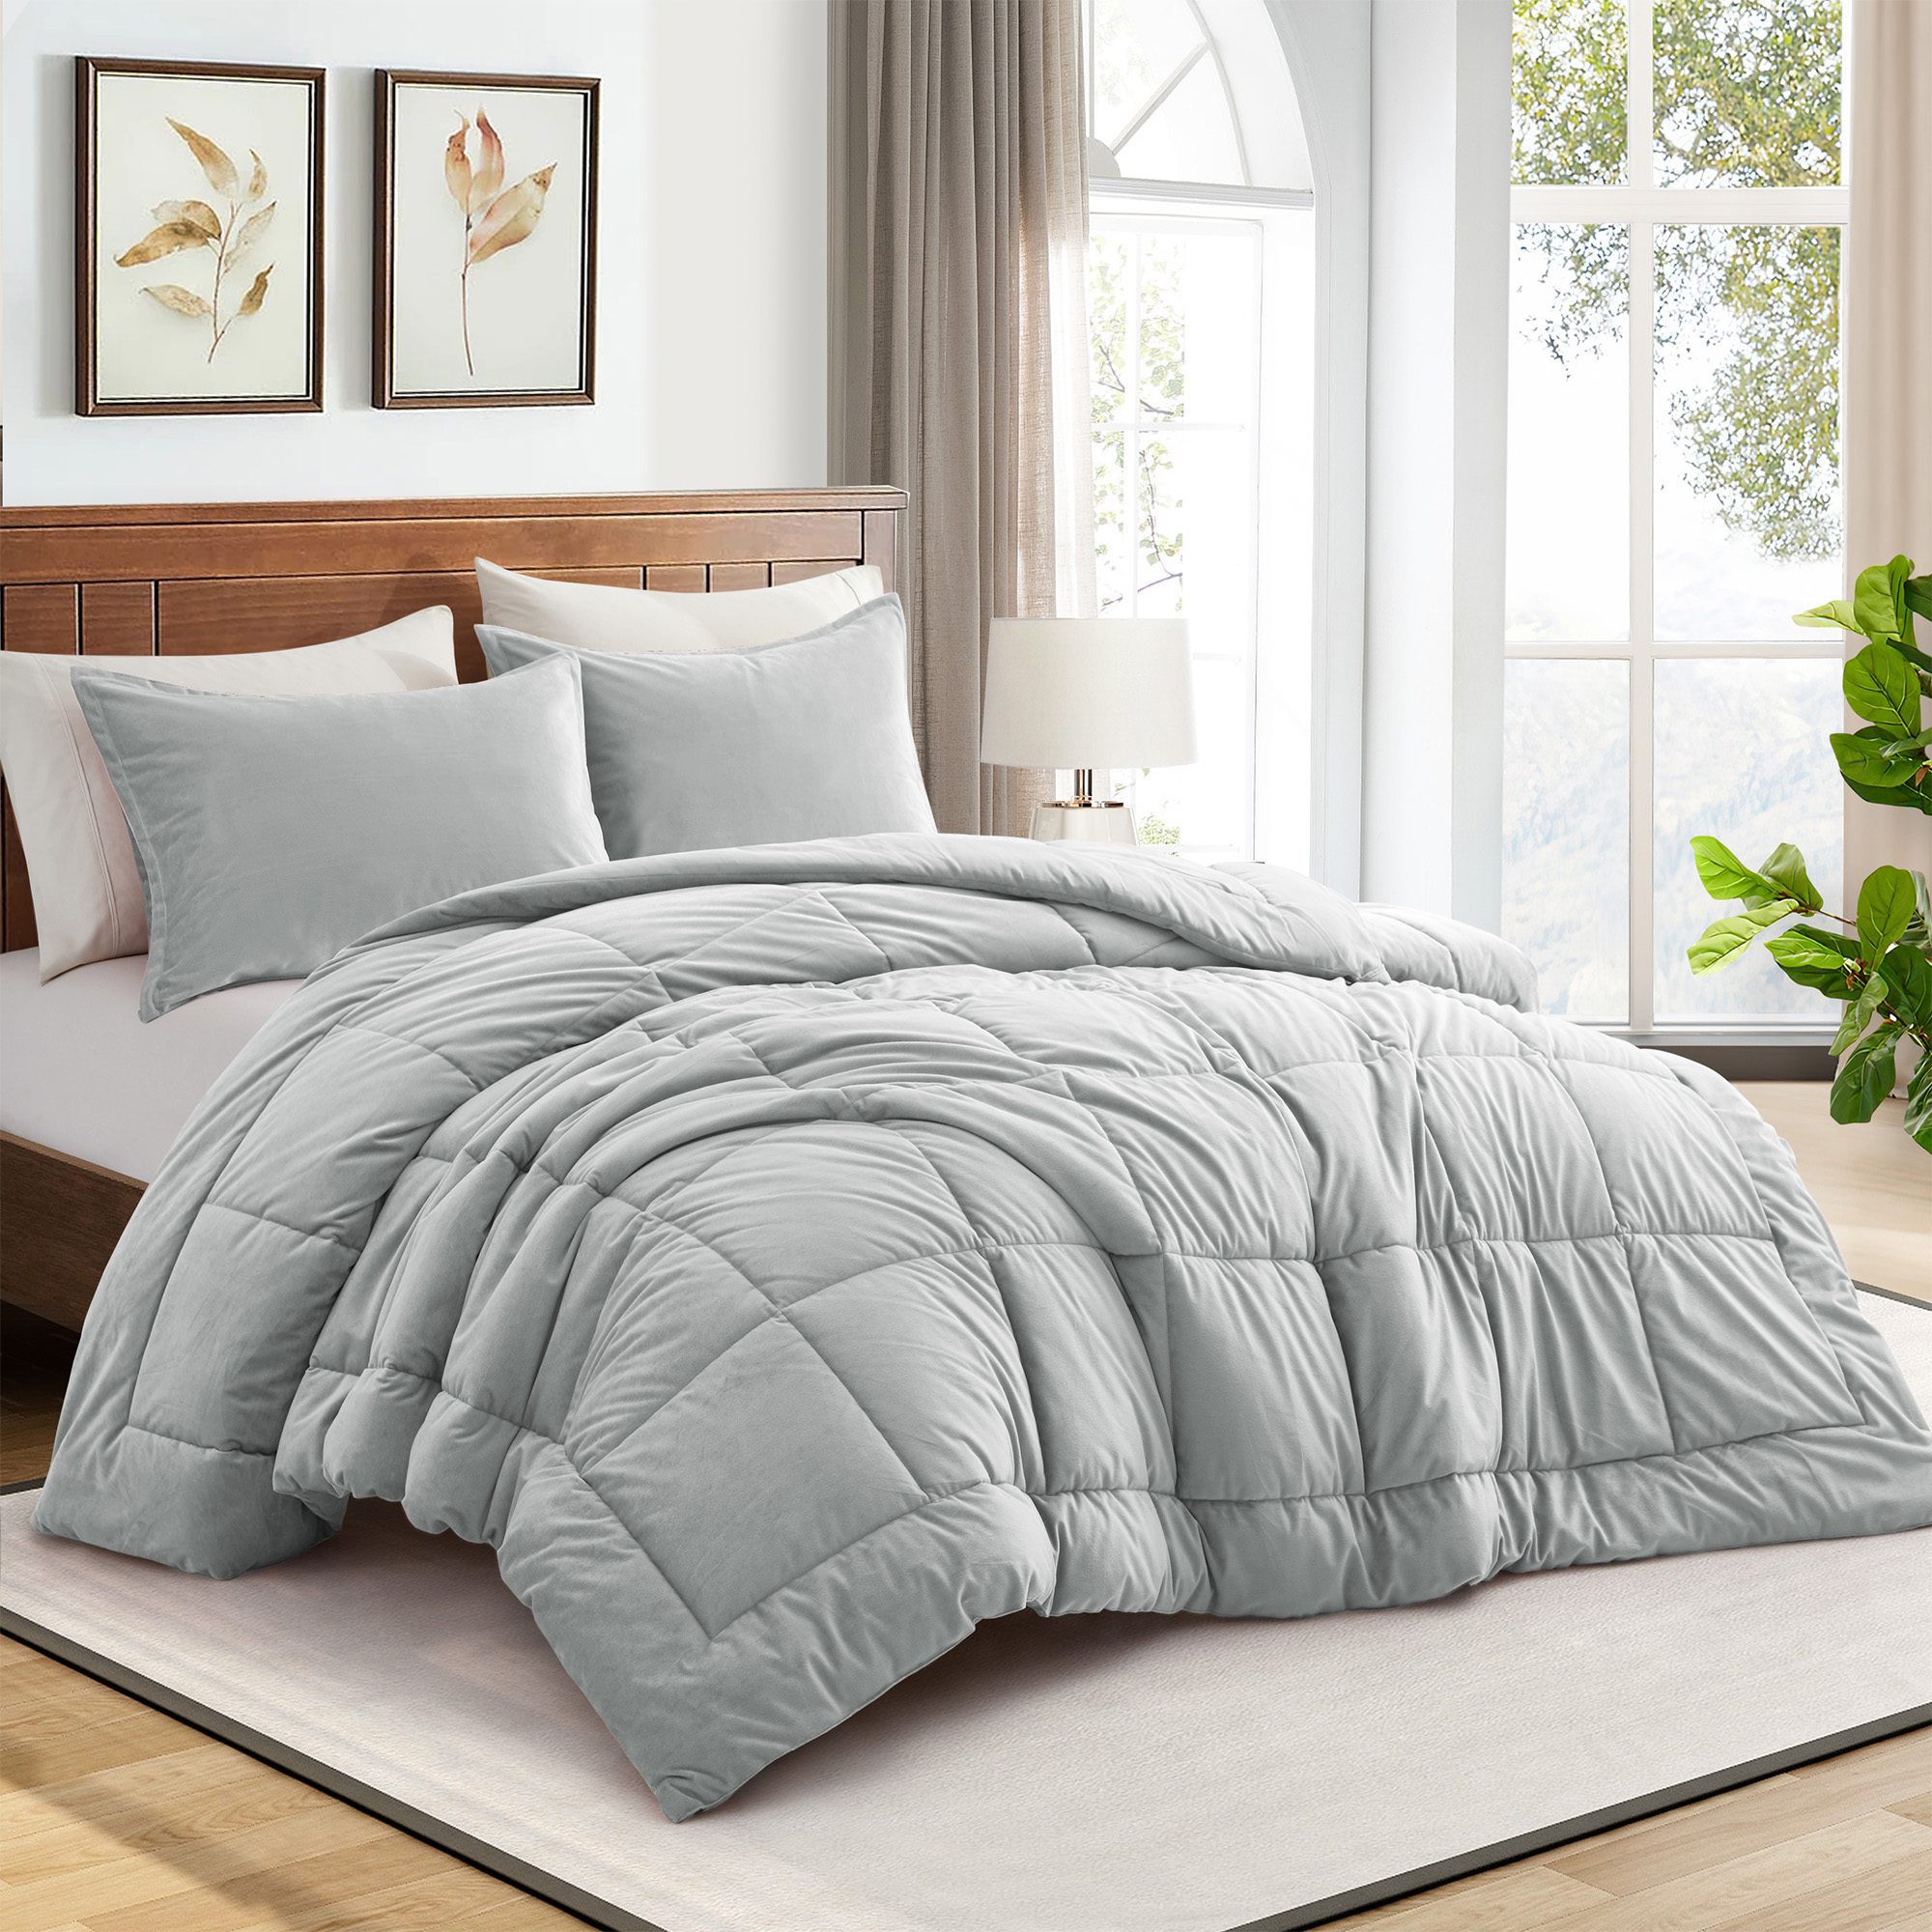 2 Or 3 Pieces Quilted Comforter All Season Down Alternative Reversible Ultra Soft Velet Duvet Insert - King Size